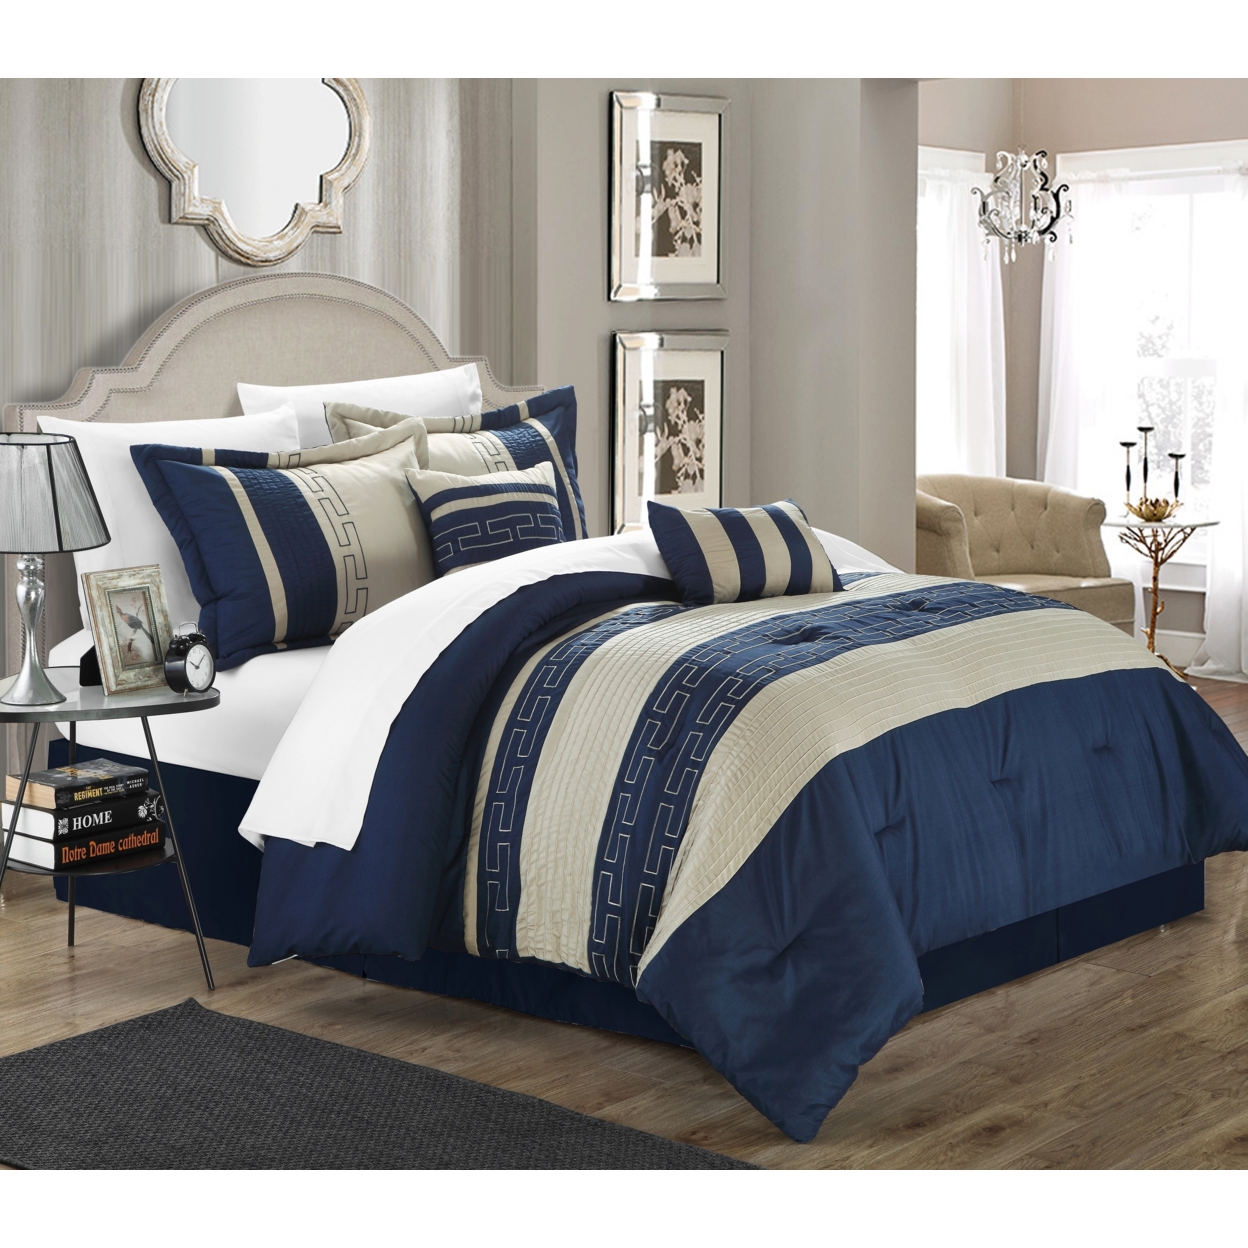 Chic Home Coralie 6-piece Comforter Set Hotel Collection - Navy, Queen